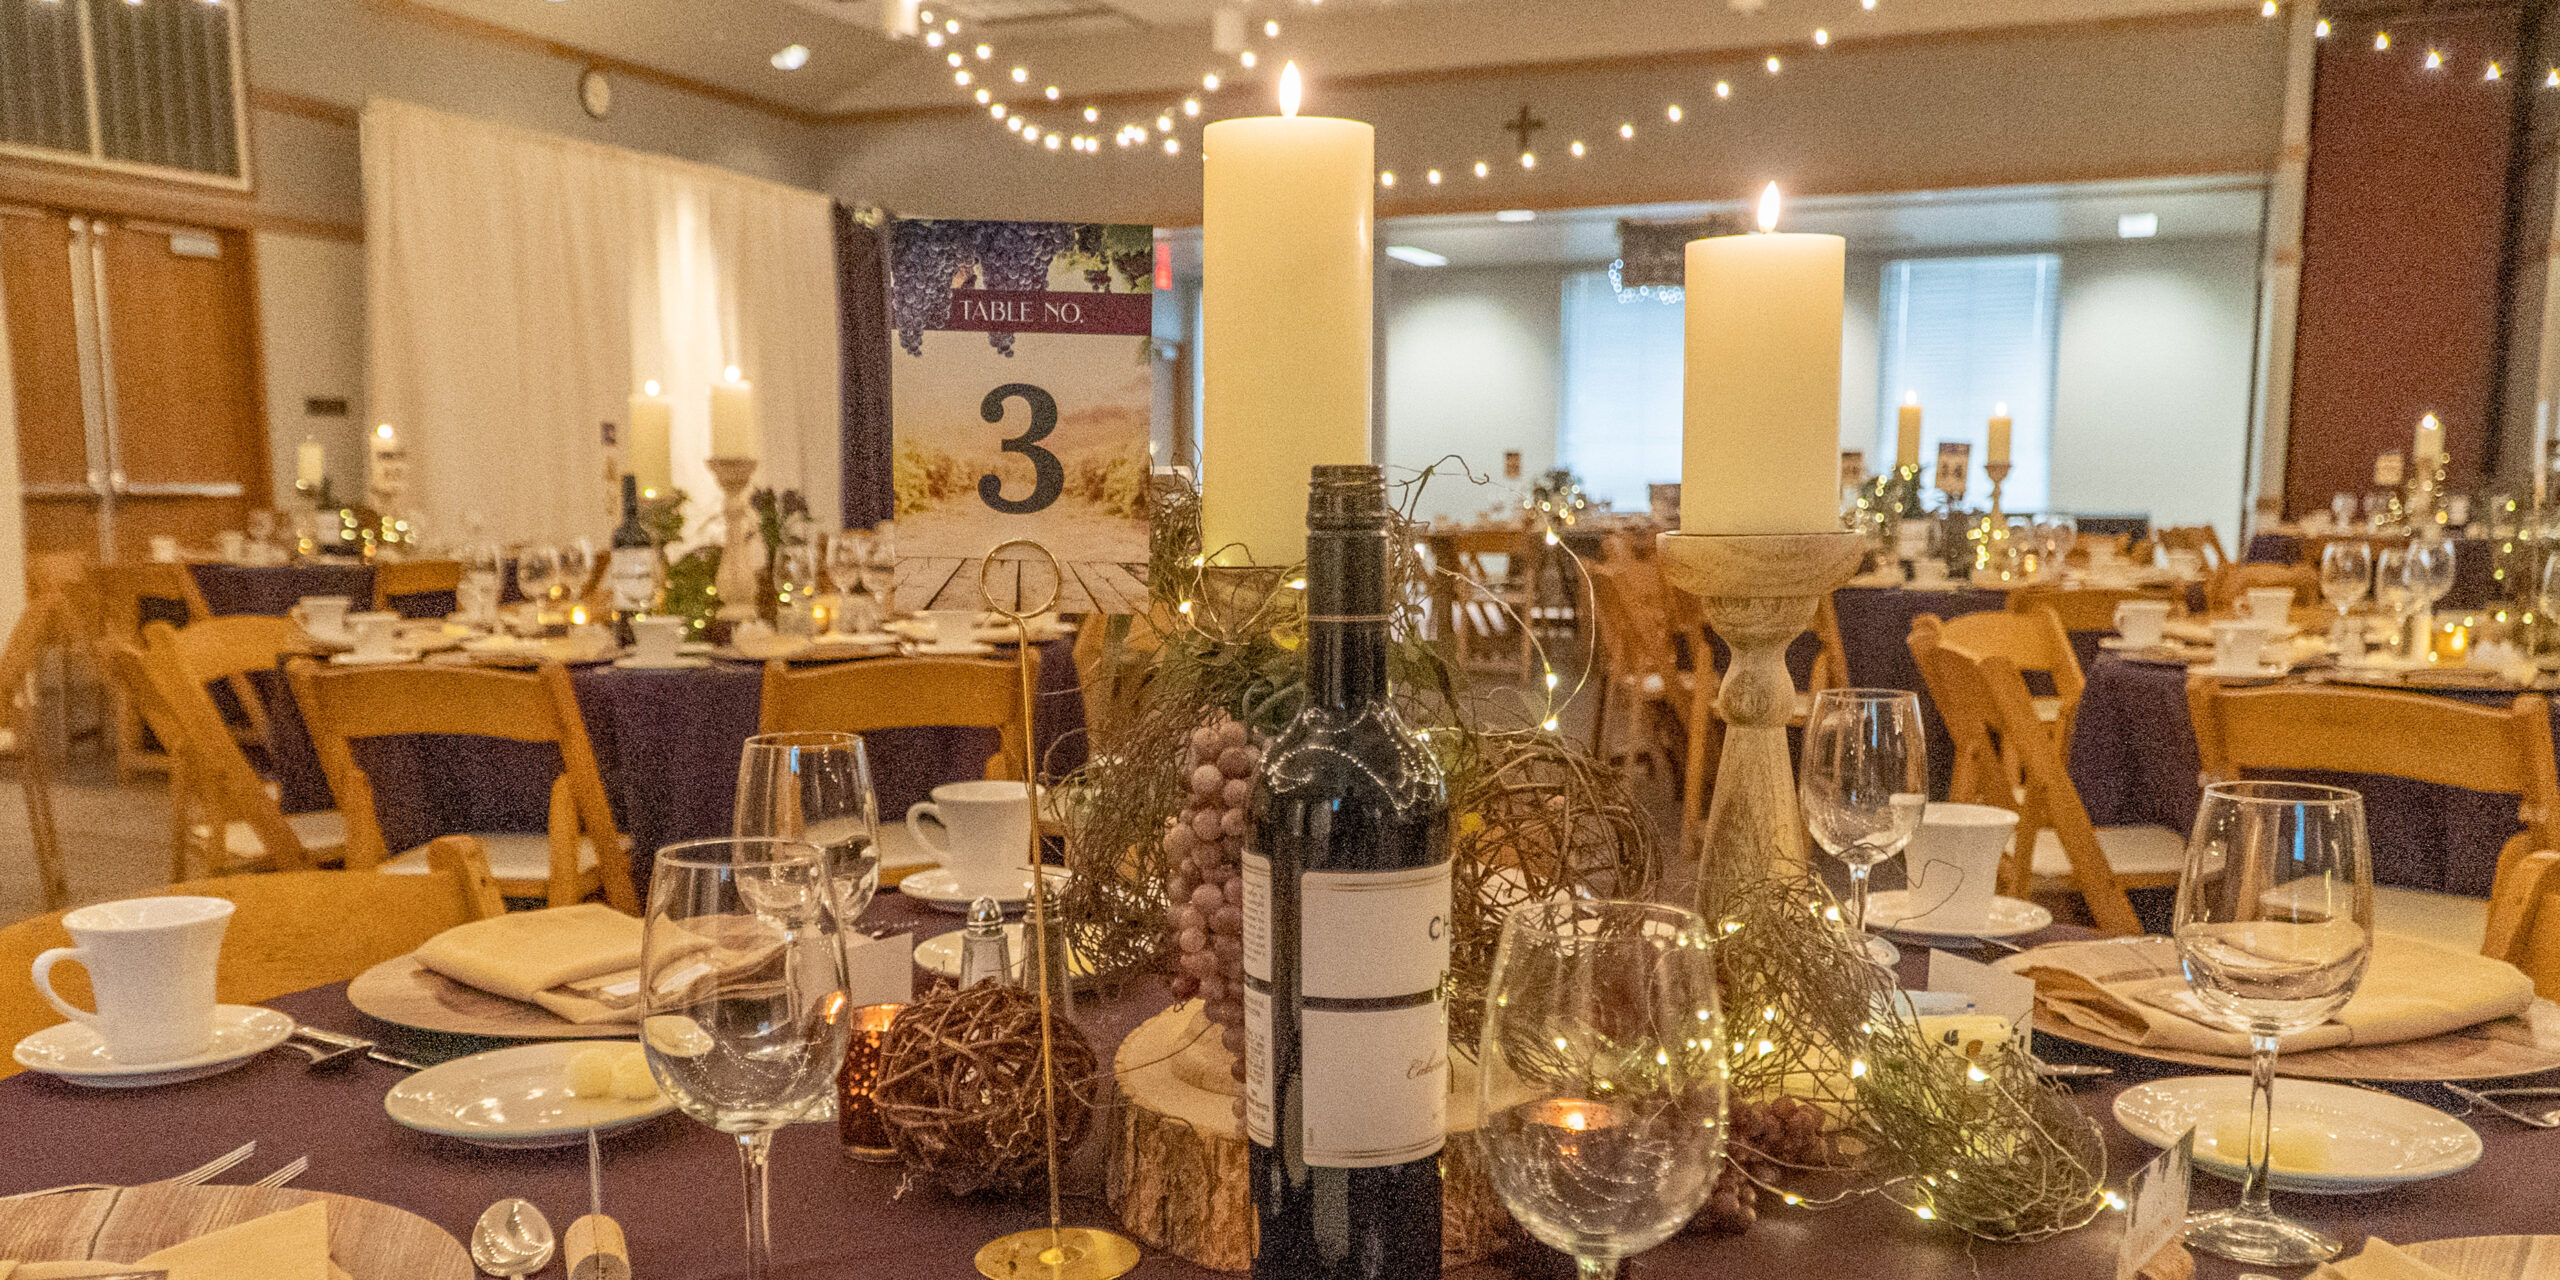 Wide view of decorations and fancy table settings in preparation for the annual Legacy Ball